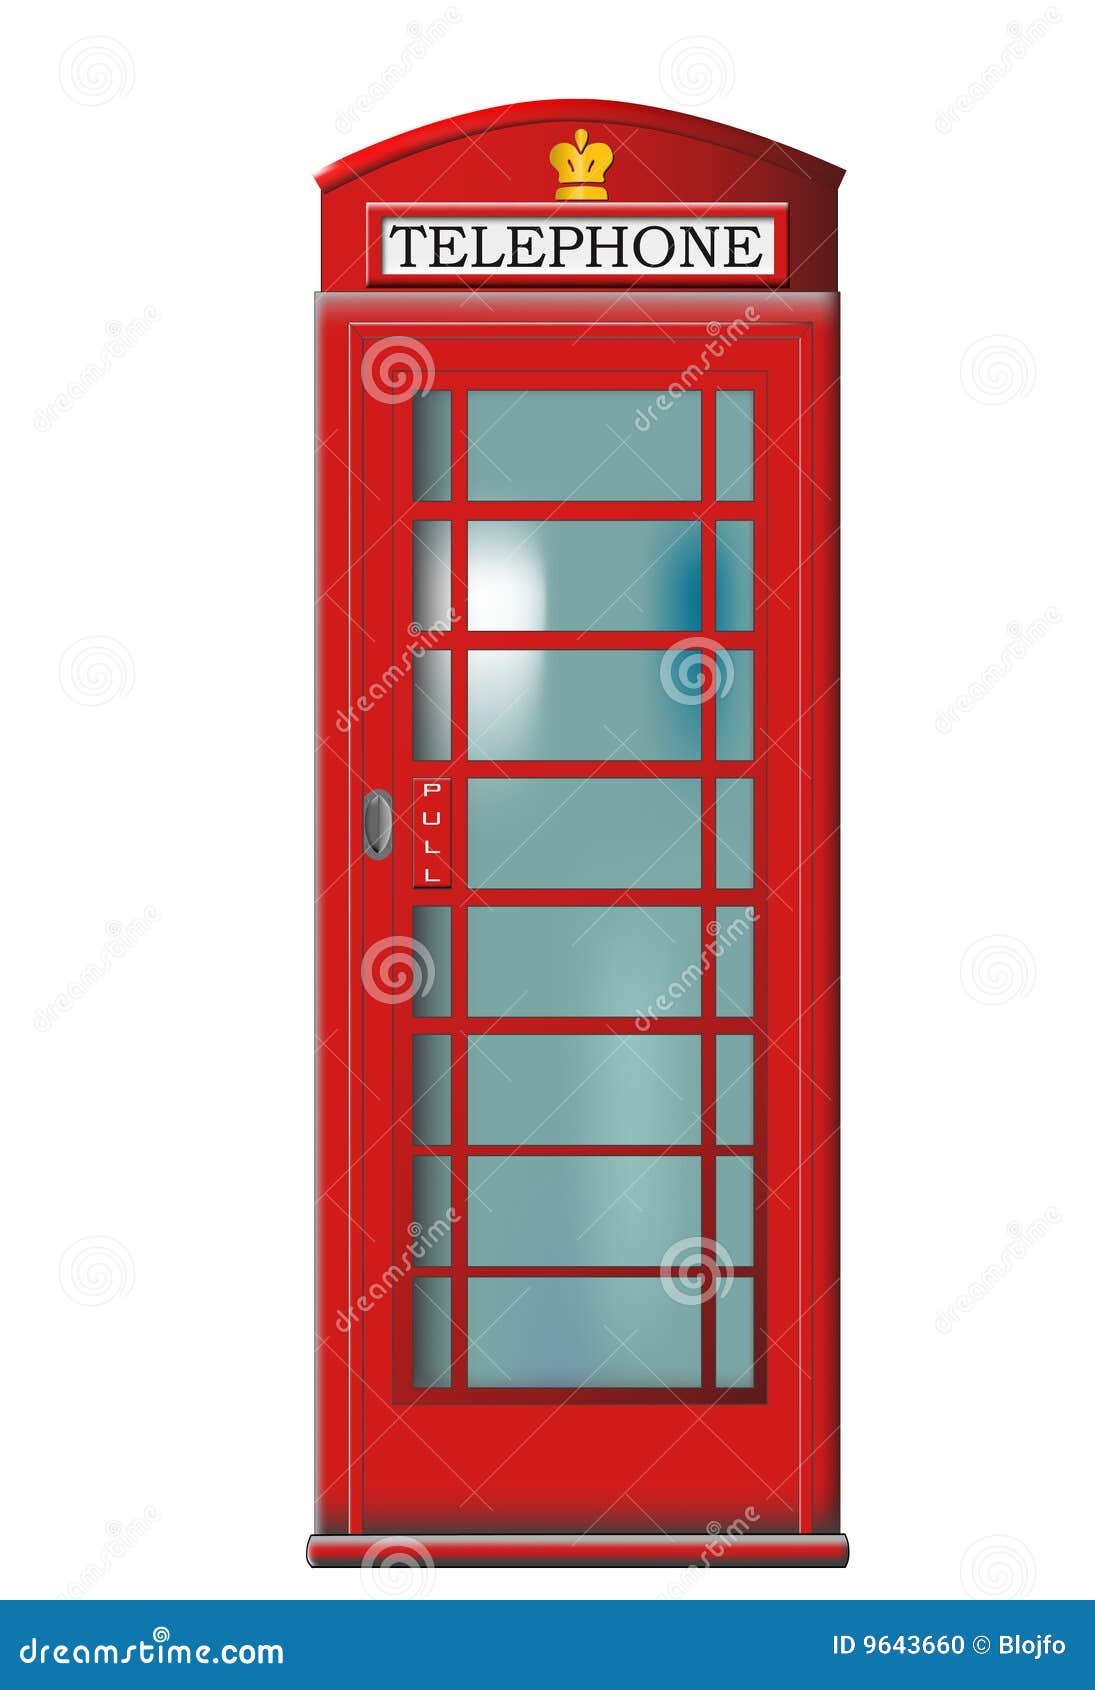 phone booth clipart - photo #34